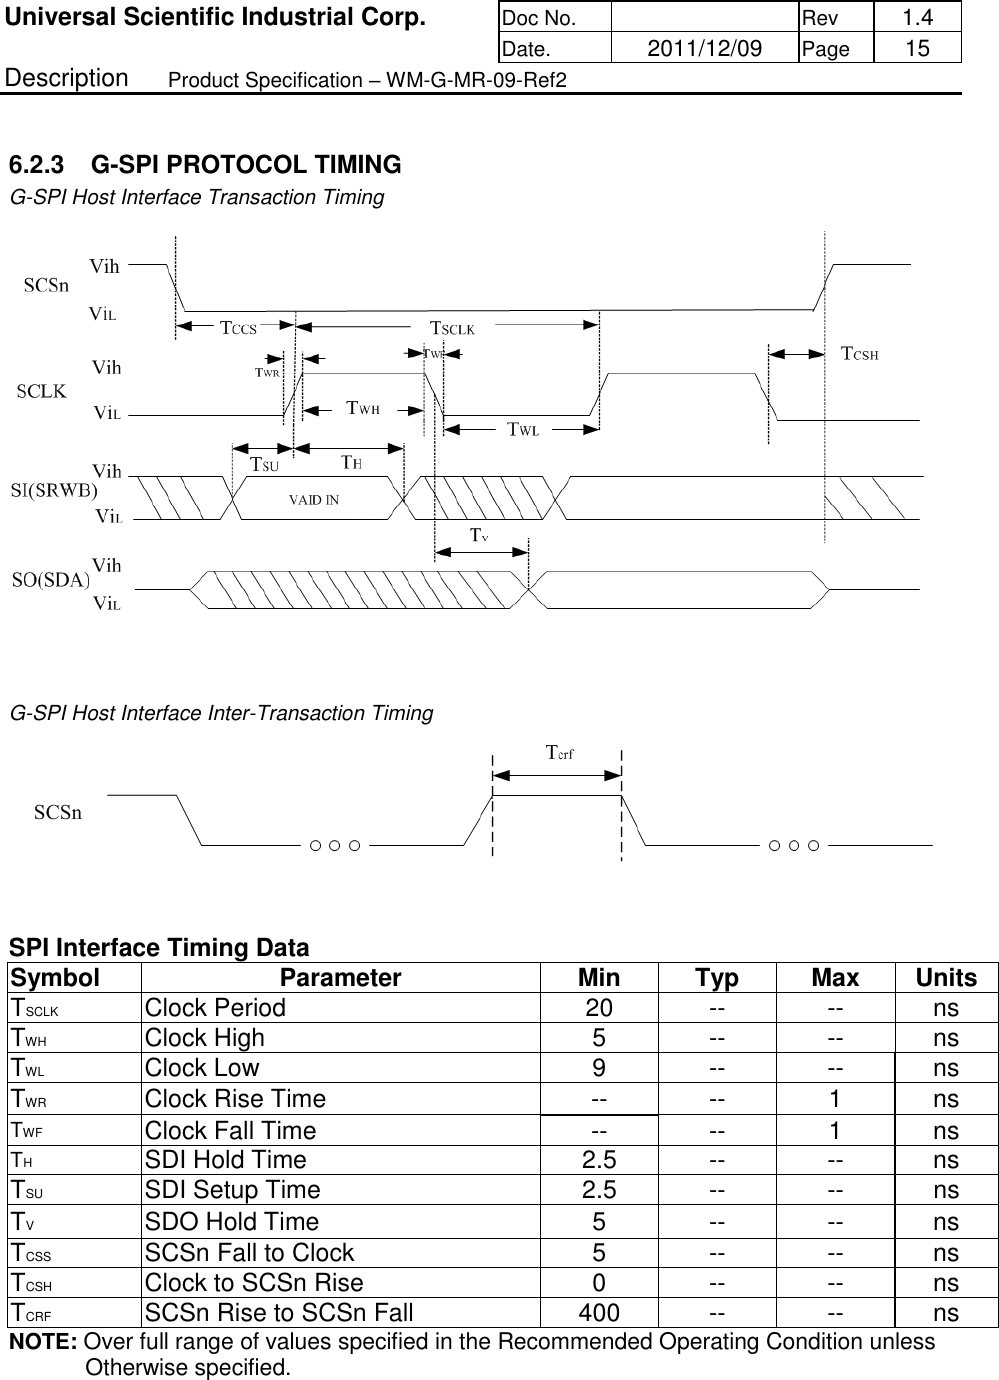 Universal Scientific Industrial Corp. Doc No.   Rev  1.4      Date.   2011/12/09 Page  15 Description   Product Specification – WM-G-MR-09-Ref2   6.2.3  G-SPI PROTOCOL TIMING G-SPI Host Interface Transaction Timing    G-SPI Host Interface Inter-Transaction Timing    SPI Interface Timing Data Symbol   Parameter   Min  Typ  Max   Units  TSCLK  Clock Period  20 -- -- ns TWH  Clock High   5  -- -- ns TWL  Clock Low   9  -- -- ns TWR  Clock Rise Time  -- --  1  ns TWF Clock Fall Time  -- --  1  ns TH SDI Hold Time  2.5  -- -- ns TSU  SDI Setup Time  2.5  -- -- ns TV  SDO Hold Time  5  -- -- ns TCSS  SCSn Fall to Clock  5  -- -- ns TCSH  Clock to SCSn Rise  0  -- -- ns TCRF  SCSn Rise to SCSn Fall   400 -- -- ns NOTE: Over full range of values specified in the Recommended Operating Condition unless              Otherwise specified.          